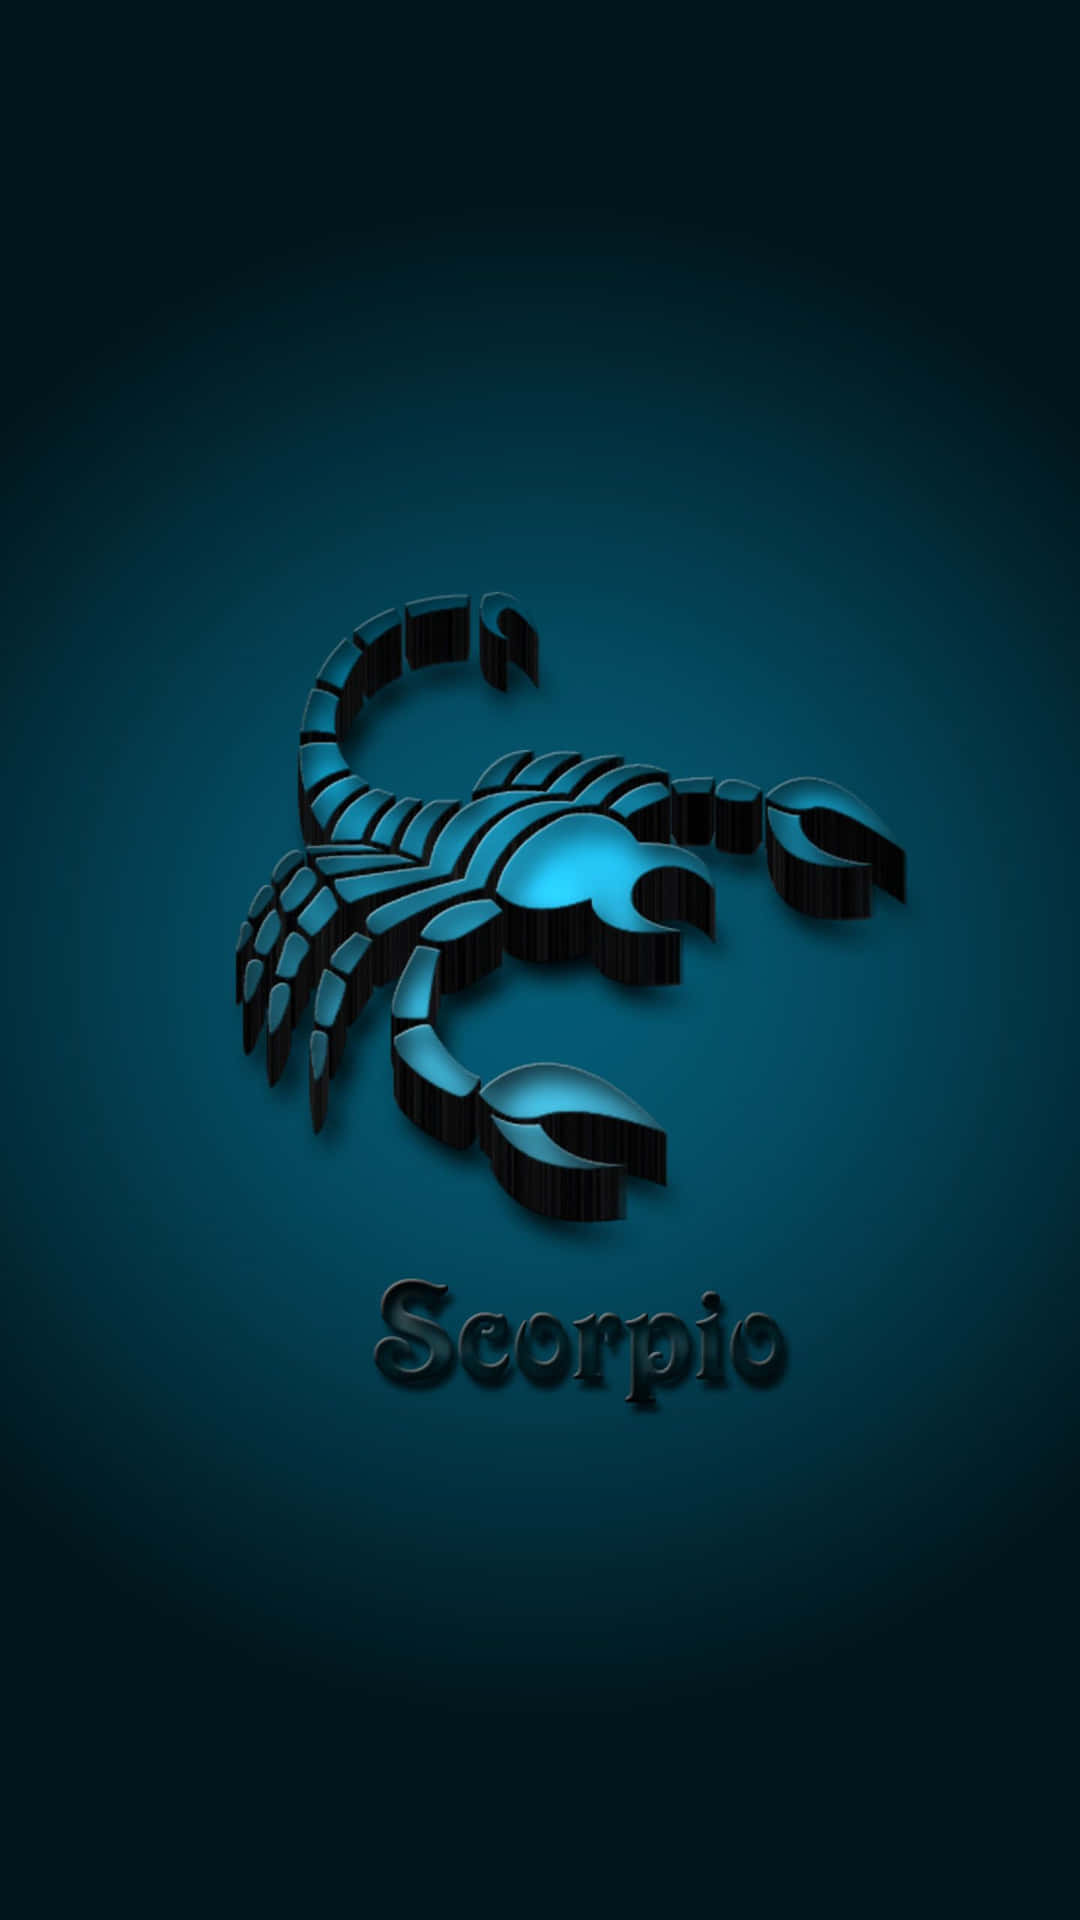 Enjoy Fun and Innovation with the Latest Scorpio Iphone Wallpaper